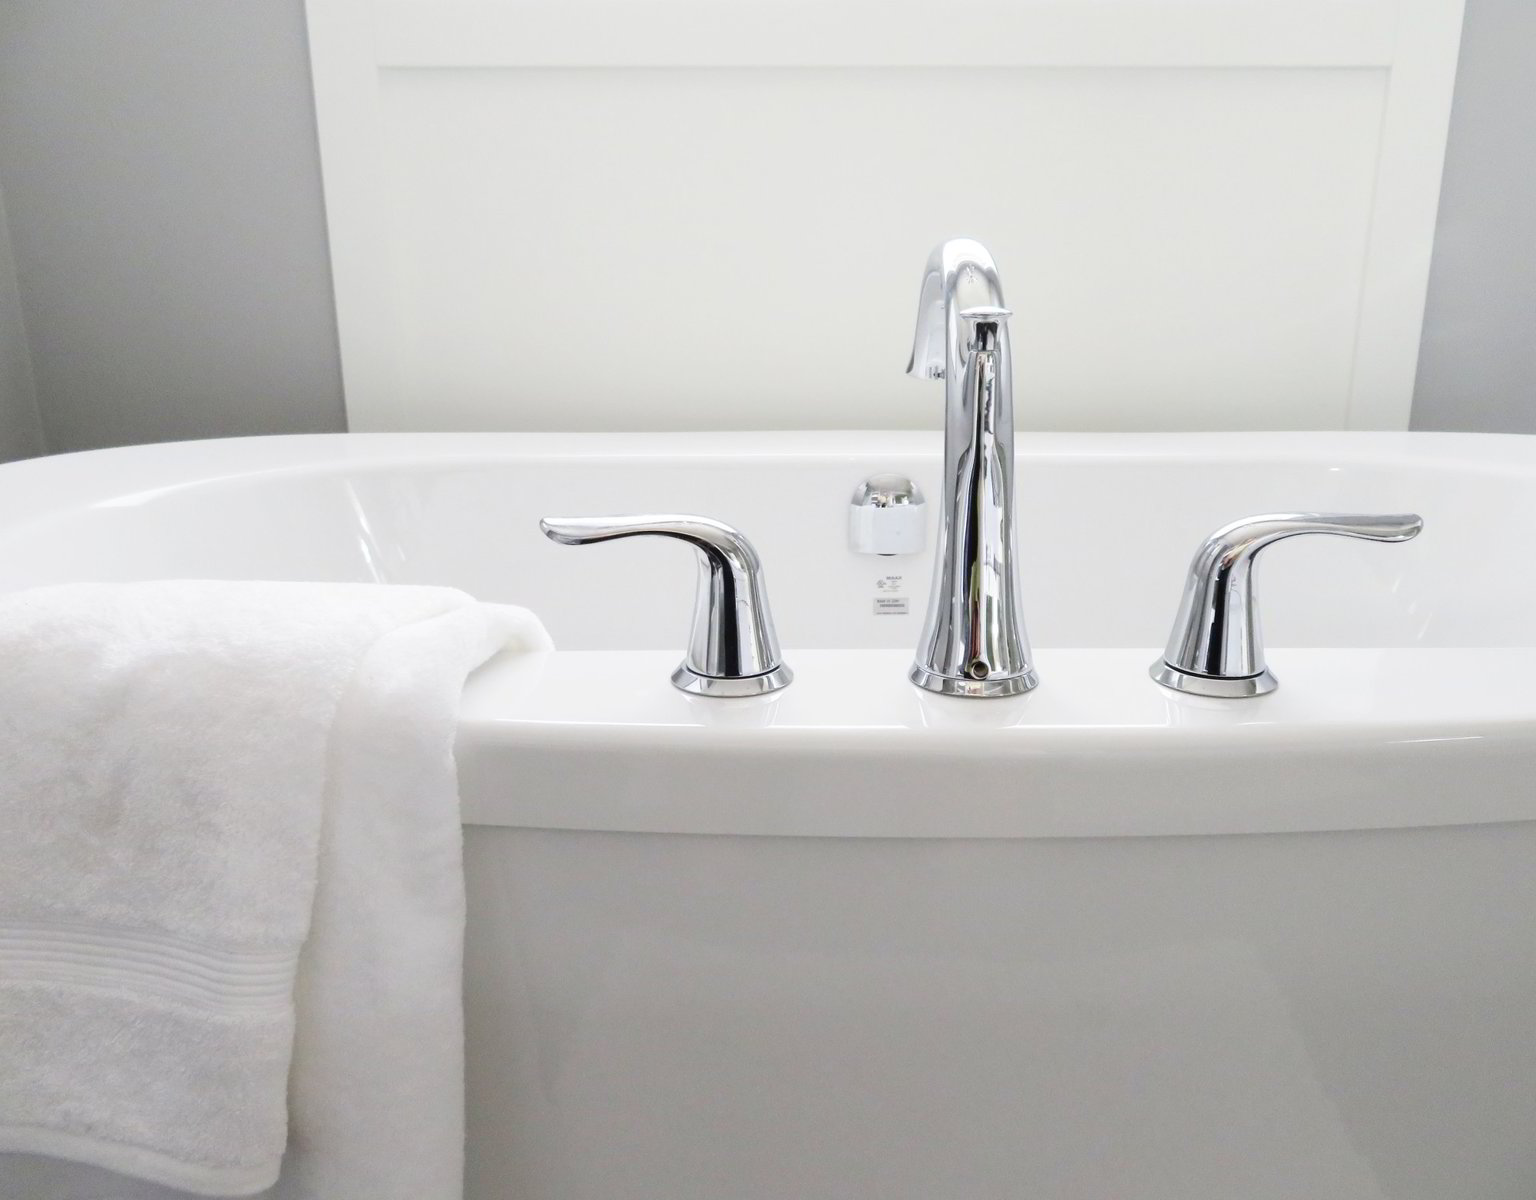 How To Fix A Leaky Bathtub Faucet, How To Remove Bathtub Faucet